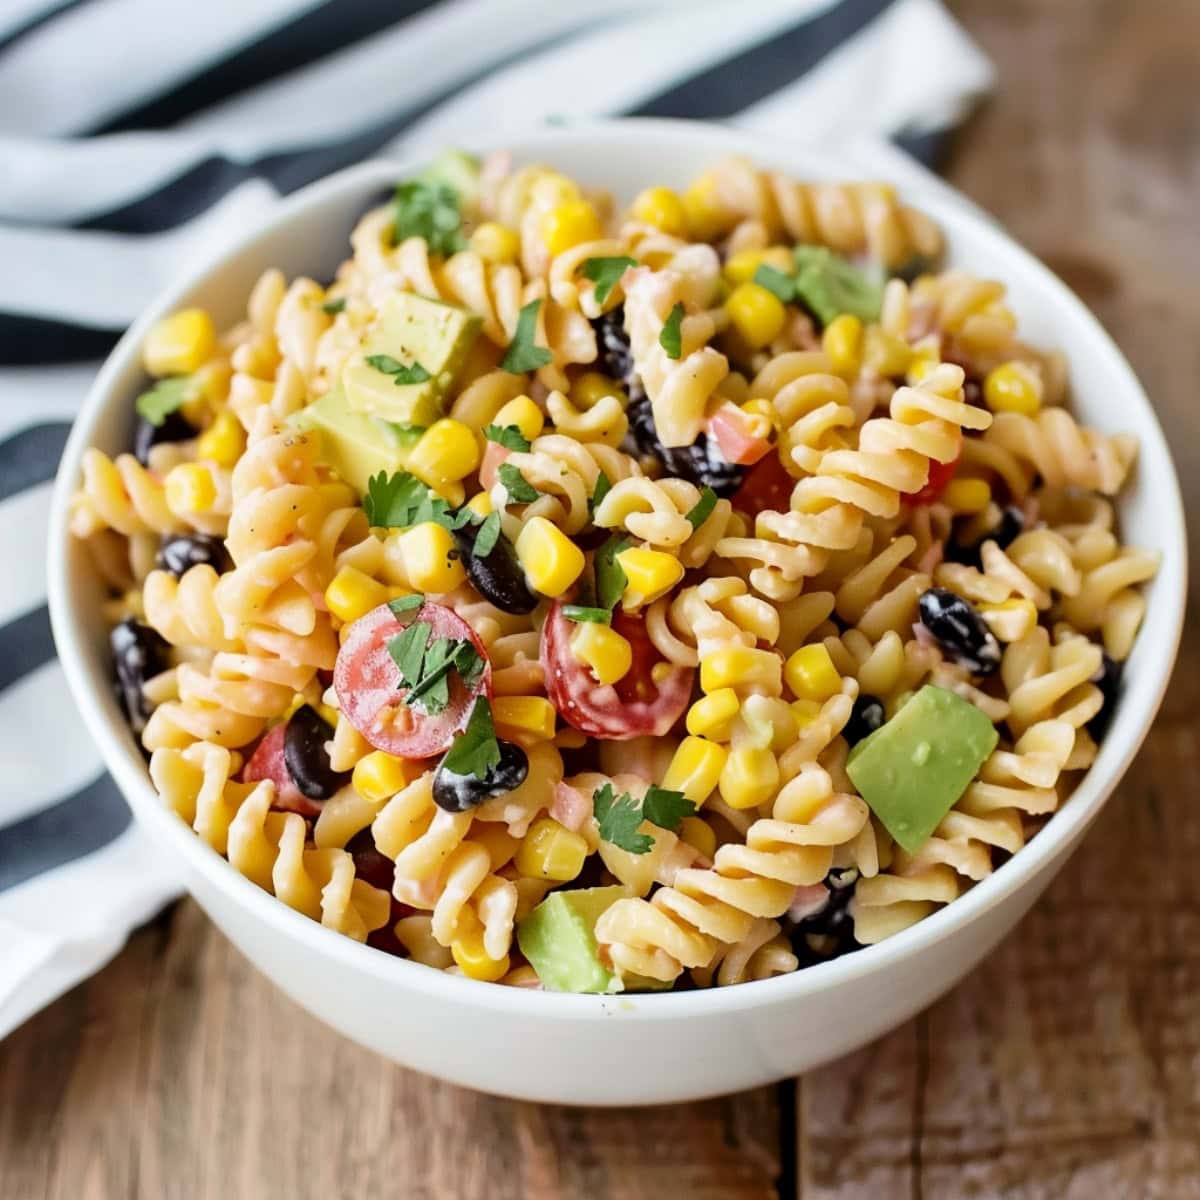 A vibrant Tex-Mex pasta salad in a white bowl, showcasing colorful ingredients like corn, black beans, cherry tomatoes, and avocado, garnished with fresh cilantro.